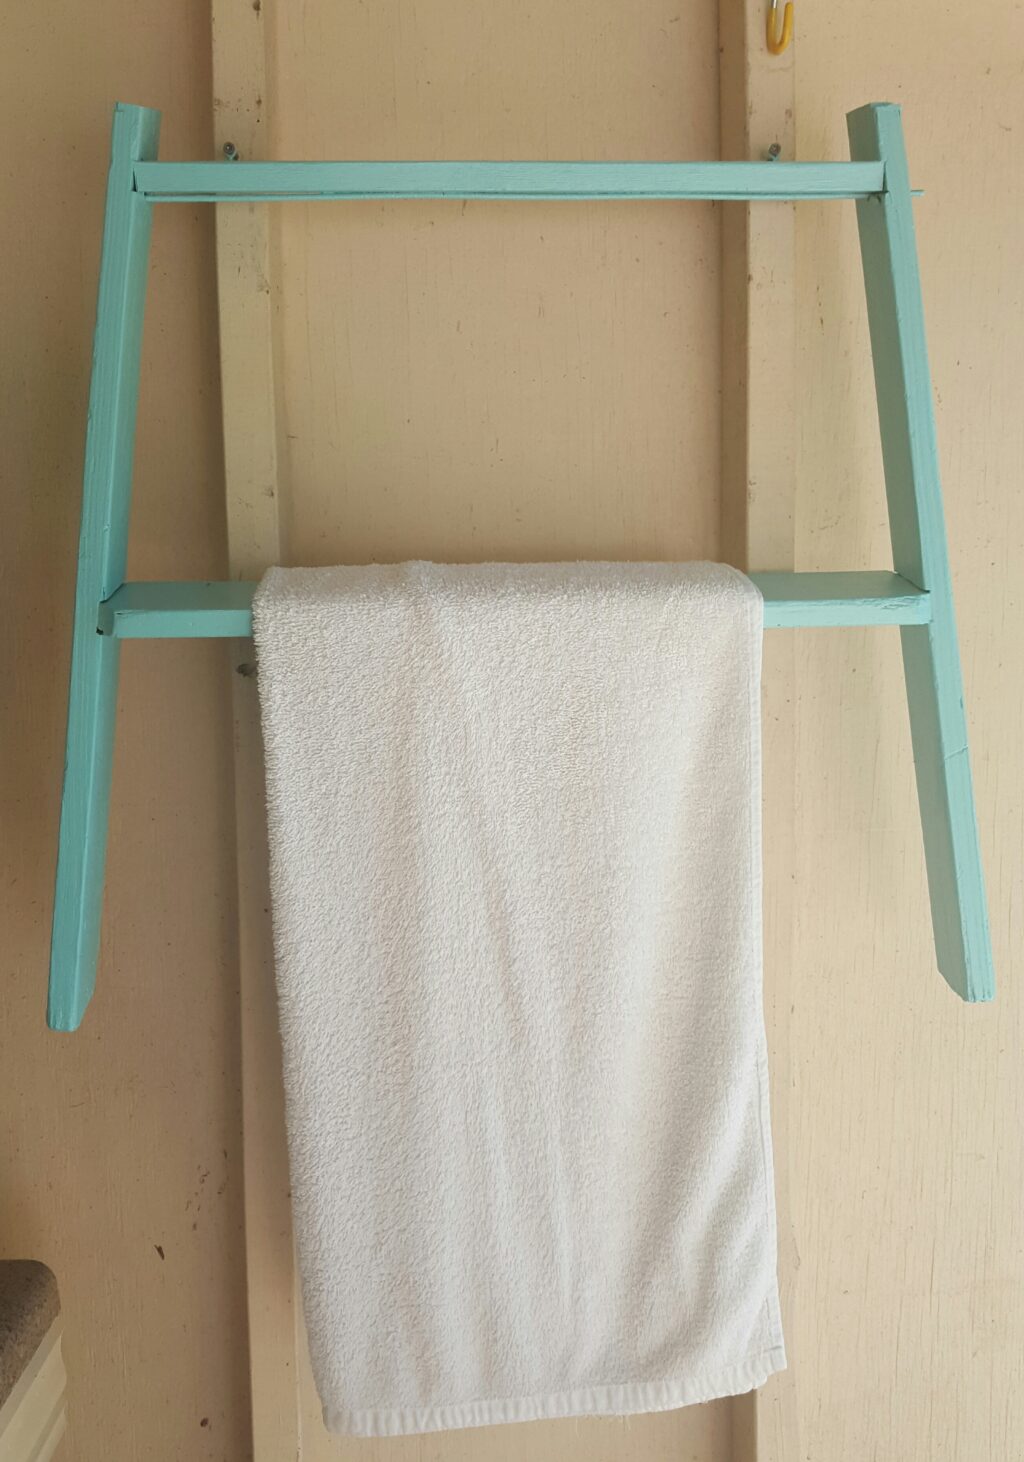 Upcycled Ladder Project Two: Shabby Chic Towel Rack For My She-Shed